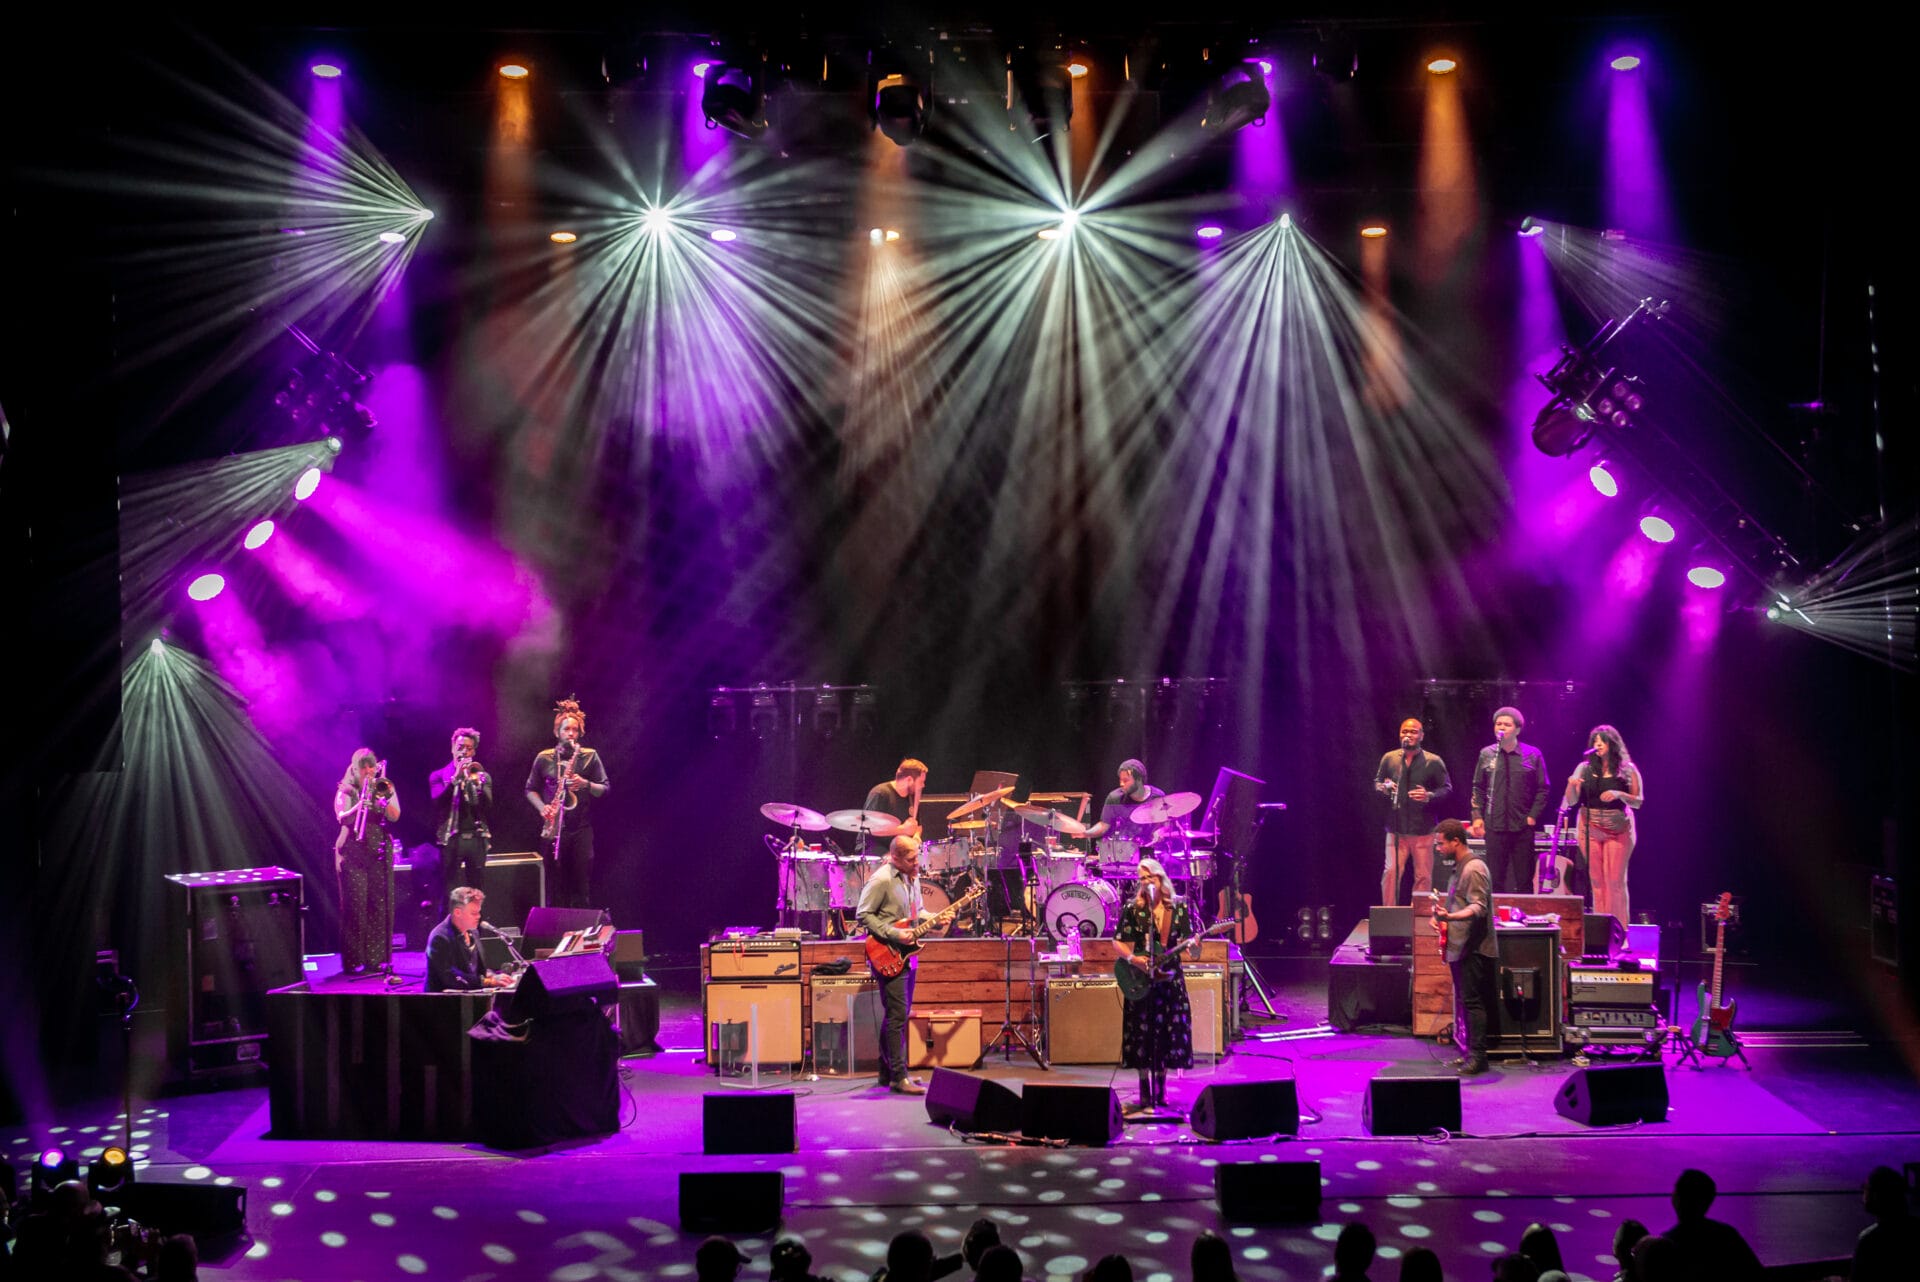 Ravi Coltrane Sits-in with Tedeschi Trucks Band at the Beacon Theatre